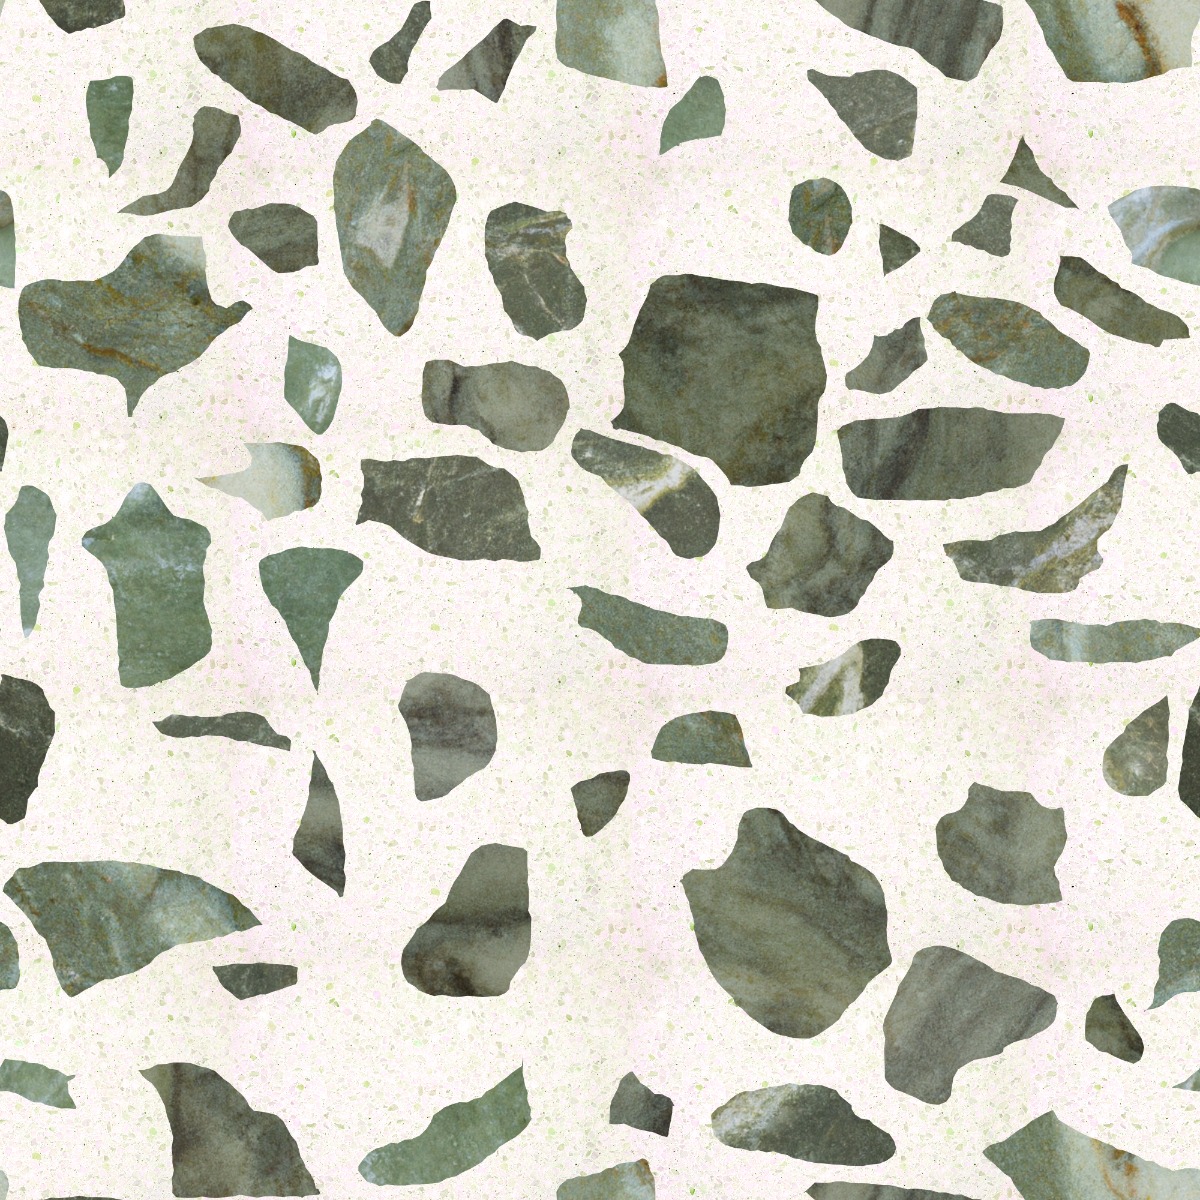 A seamless stone texture with verde alpi marble blocks arranged in a Varied Terrazzo pattern